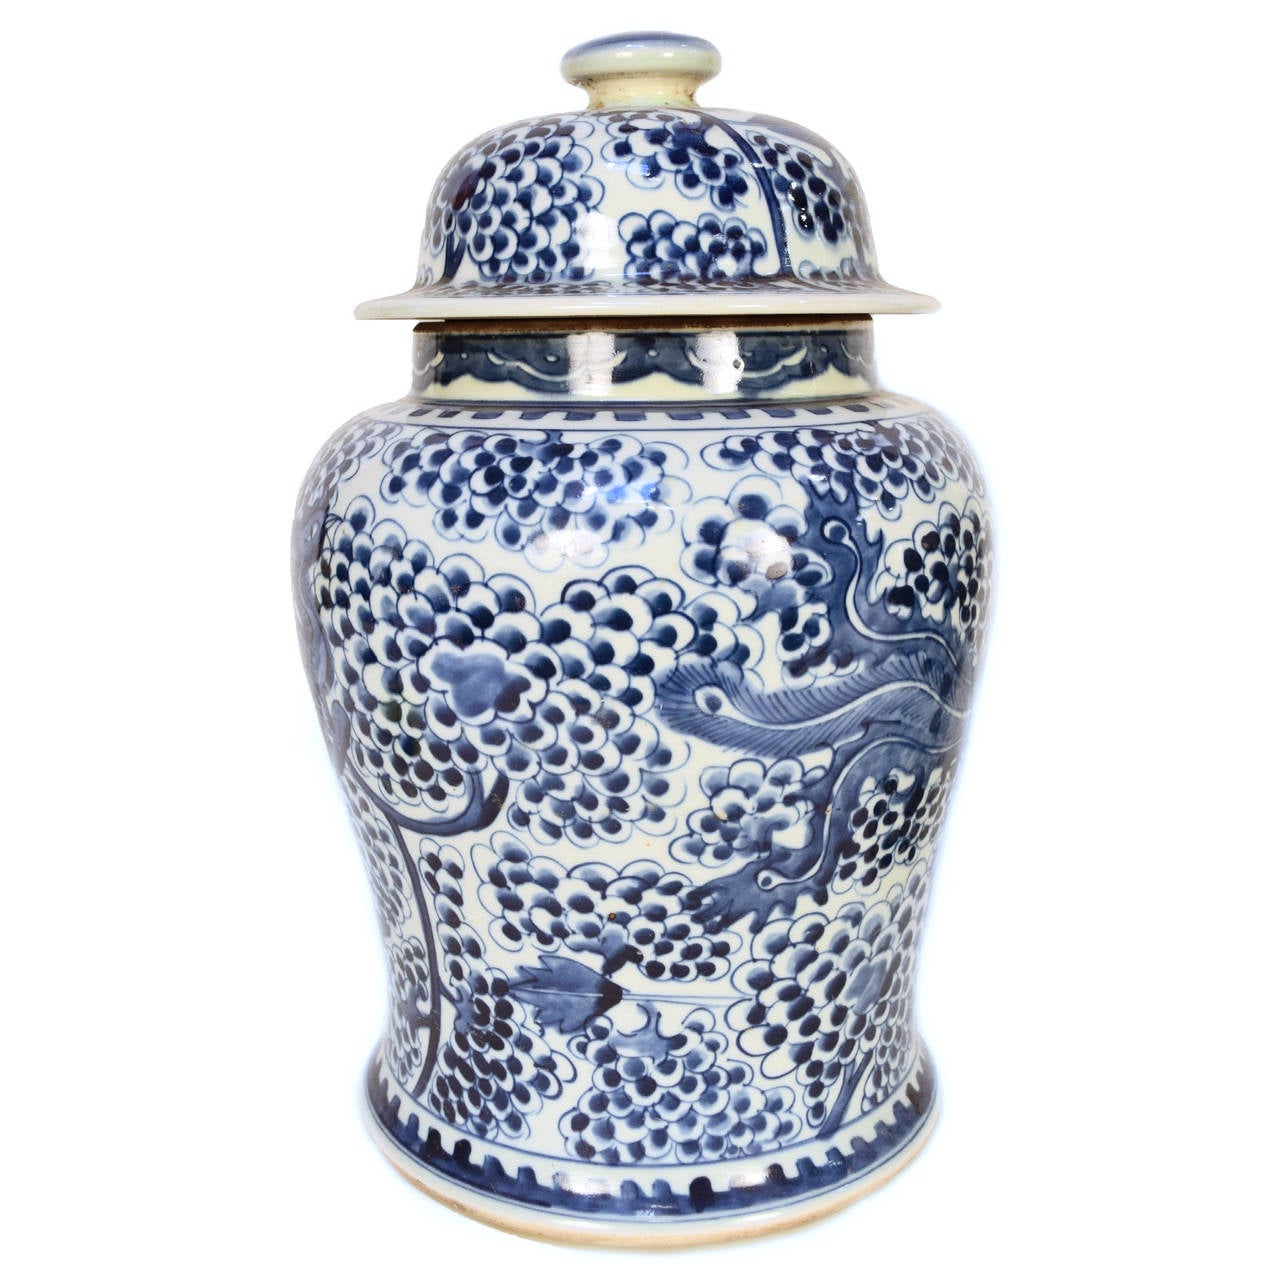 Porcelain covered blue and white ginger jar depicting phoenix & fruit on the vine. The Phoenix, also called Fenghuang or 